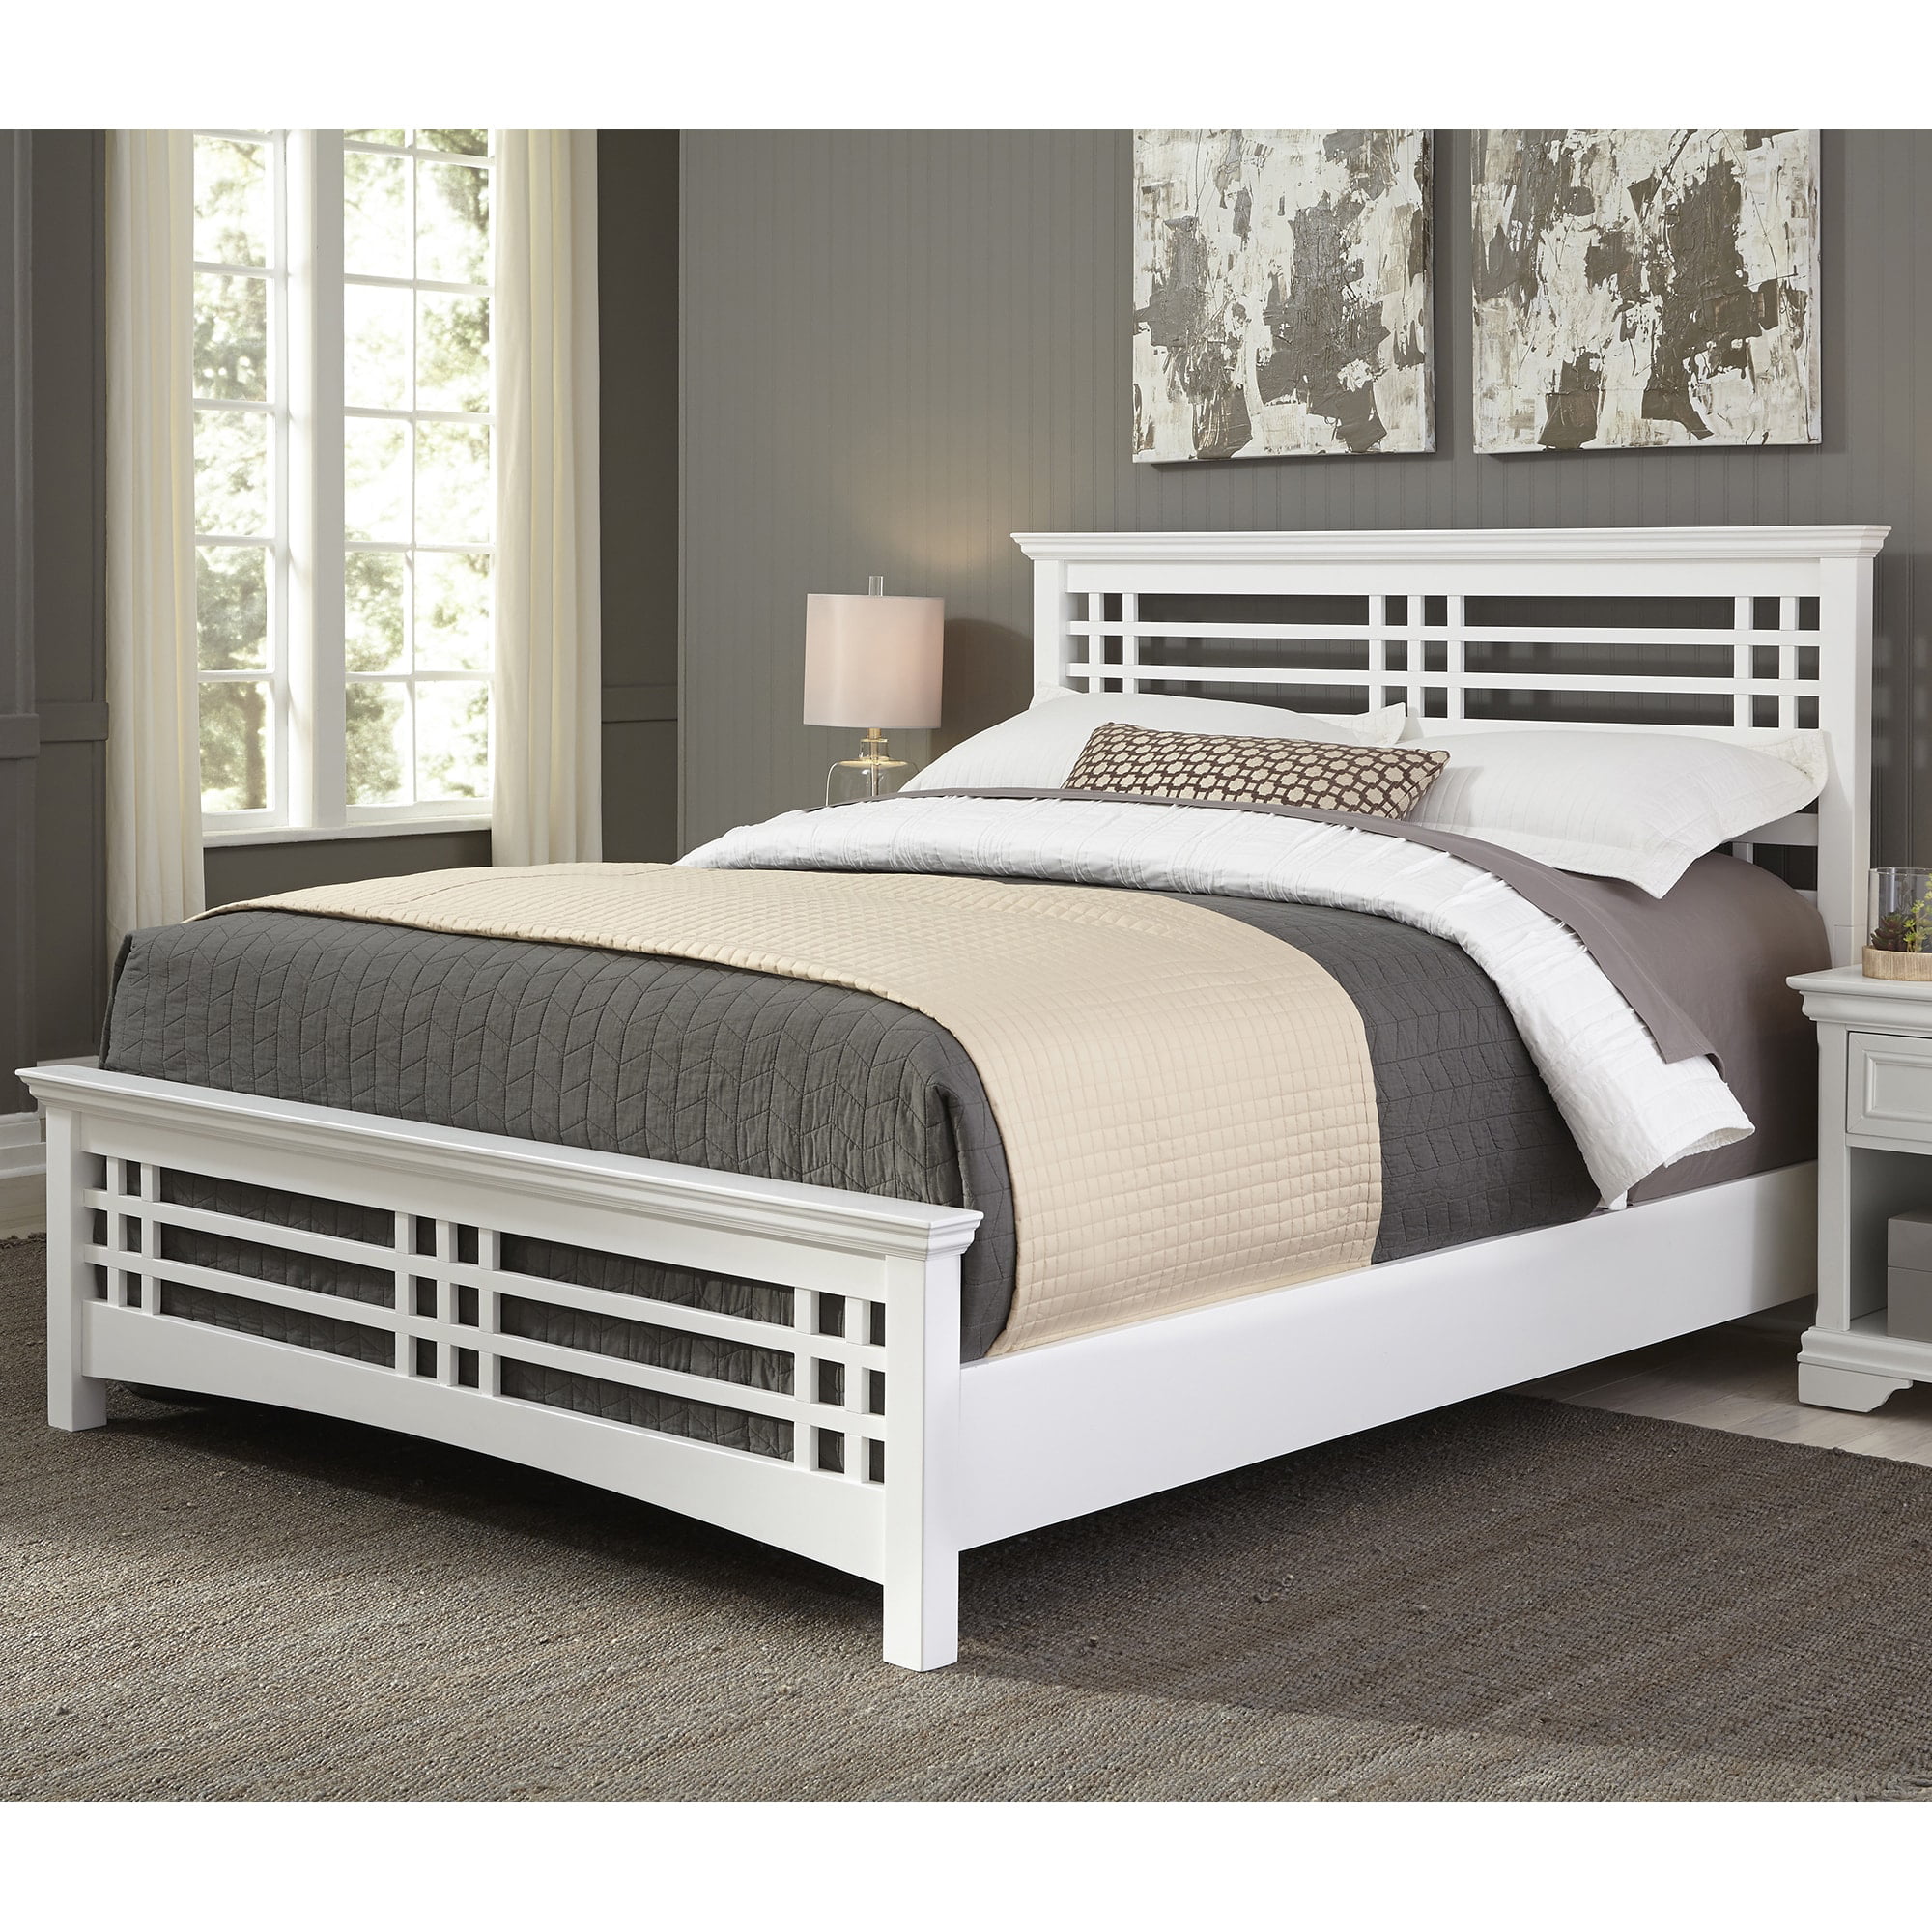 Fashion Bed Group Avery Complete, King Size Mission Style Bed Frame